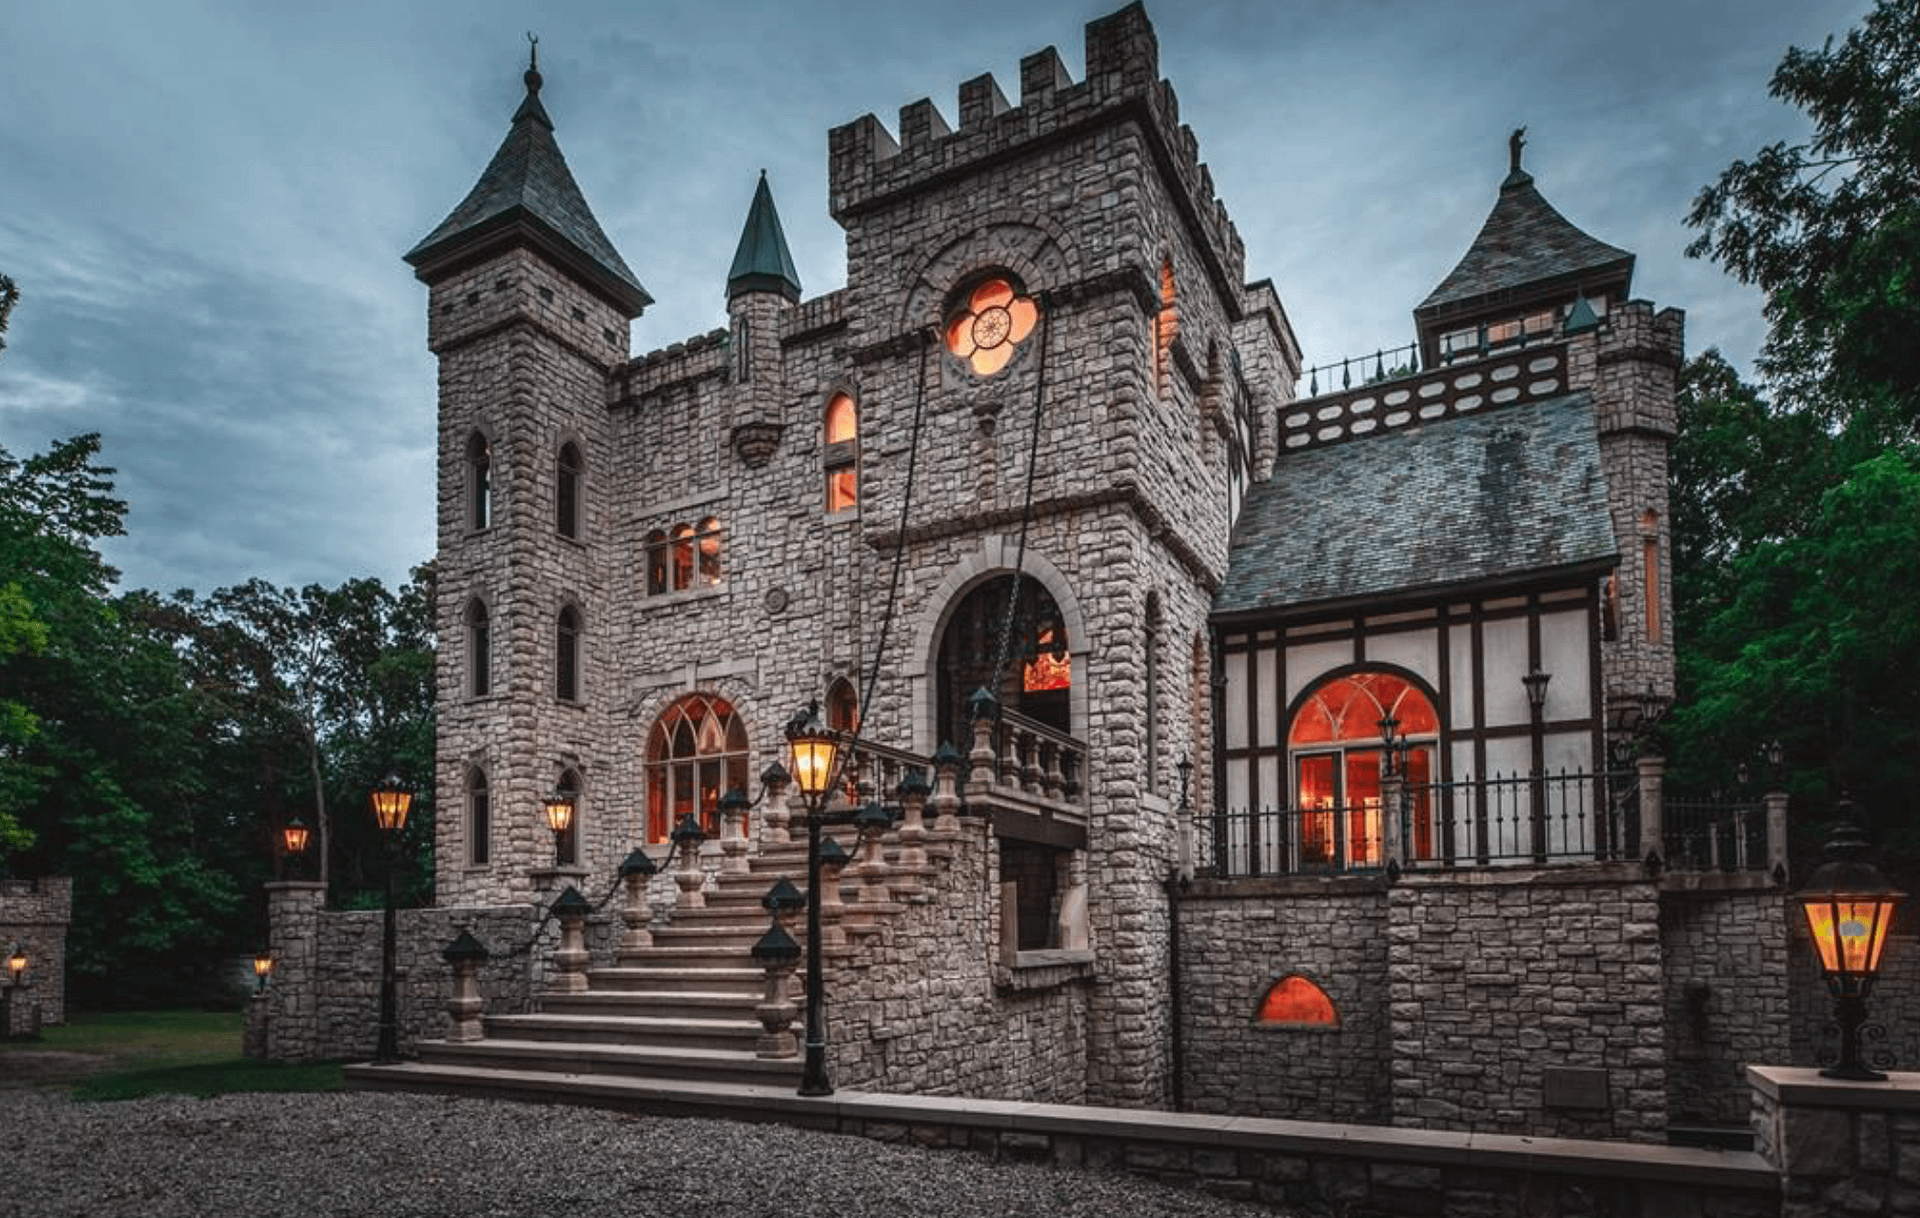 Your Very Own Castle In Rochester, Michigan (PHOTOS)